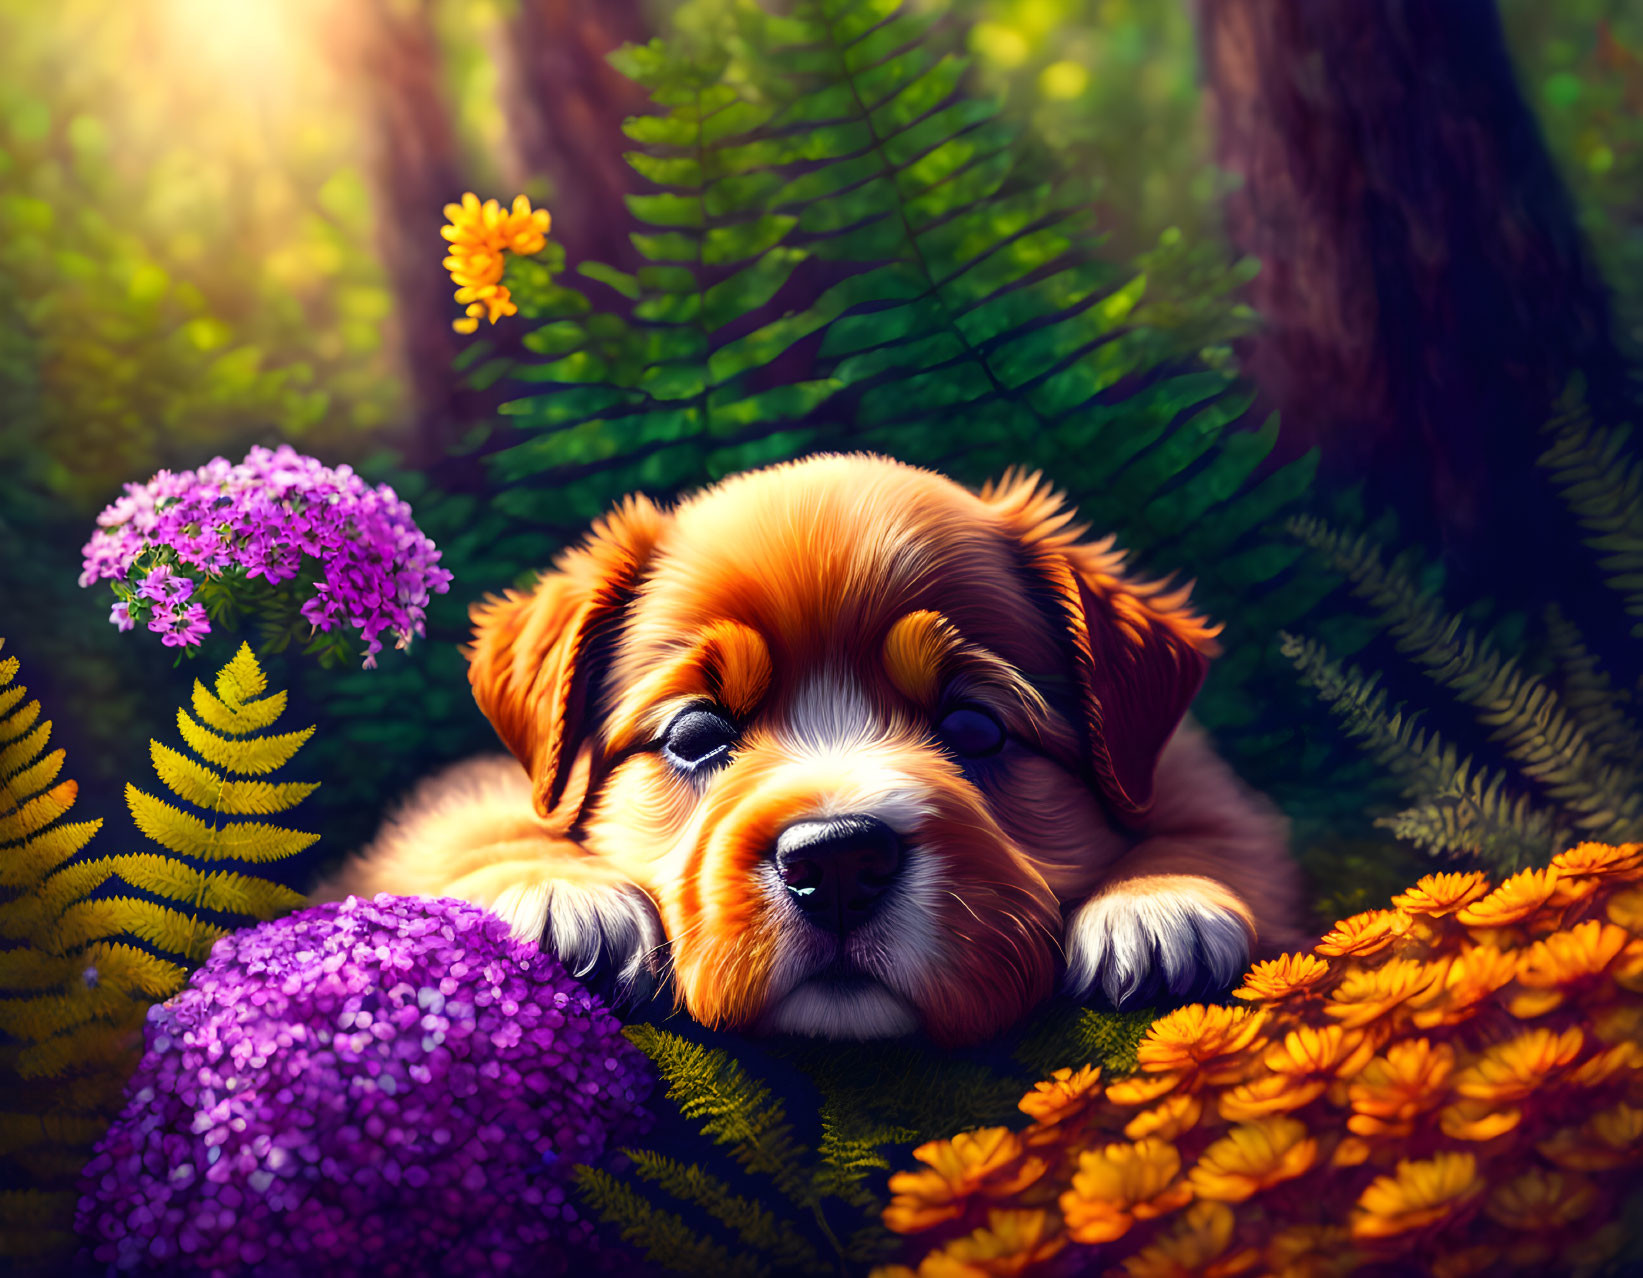 Puppy among flowers.